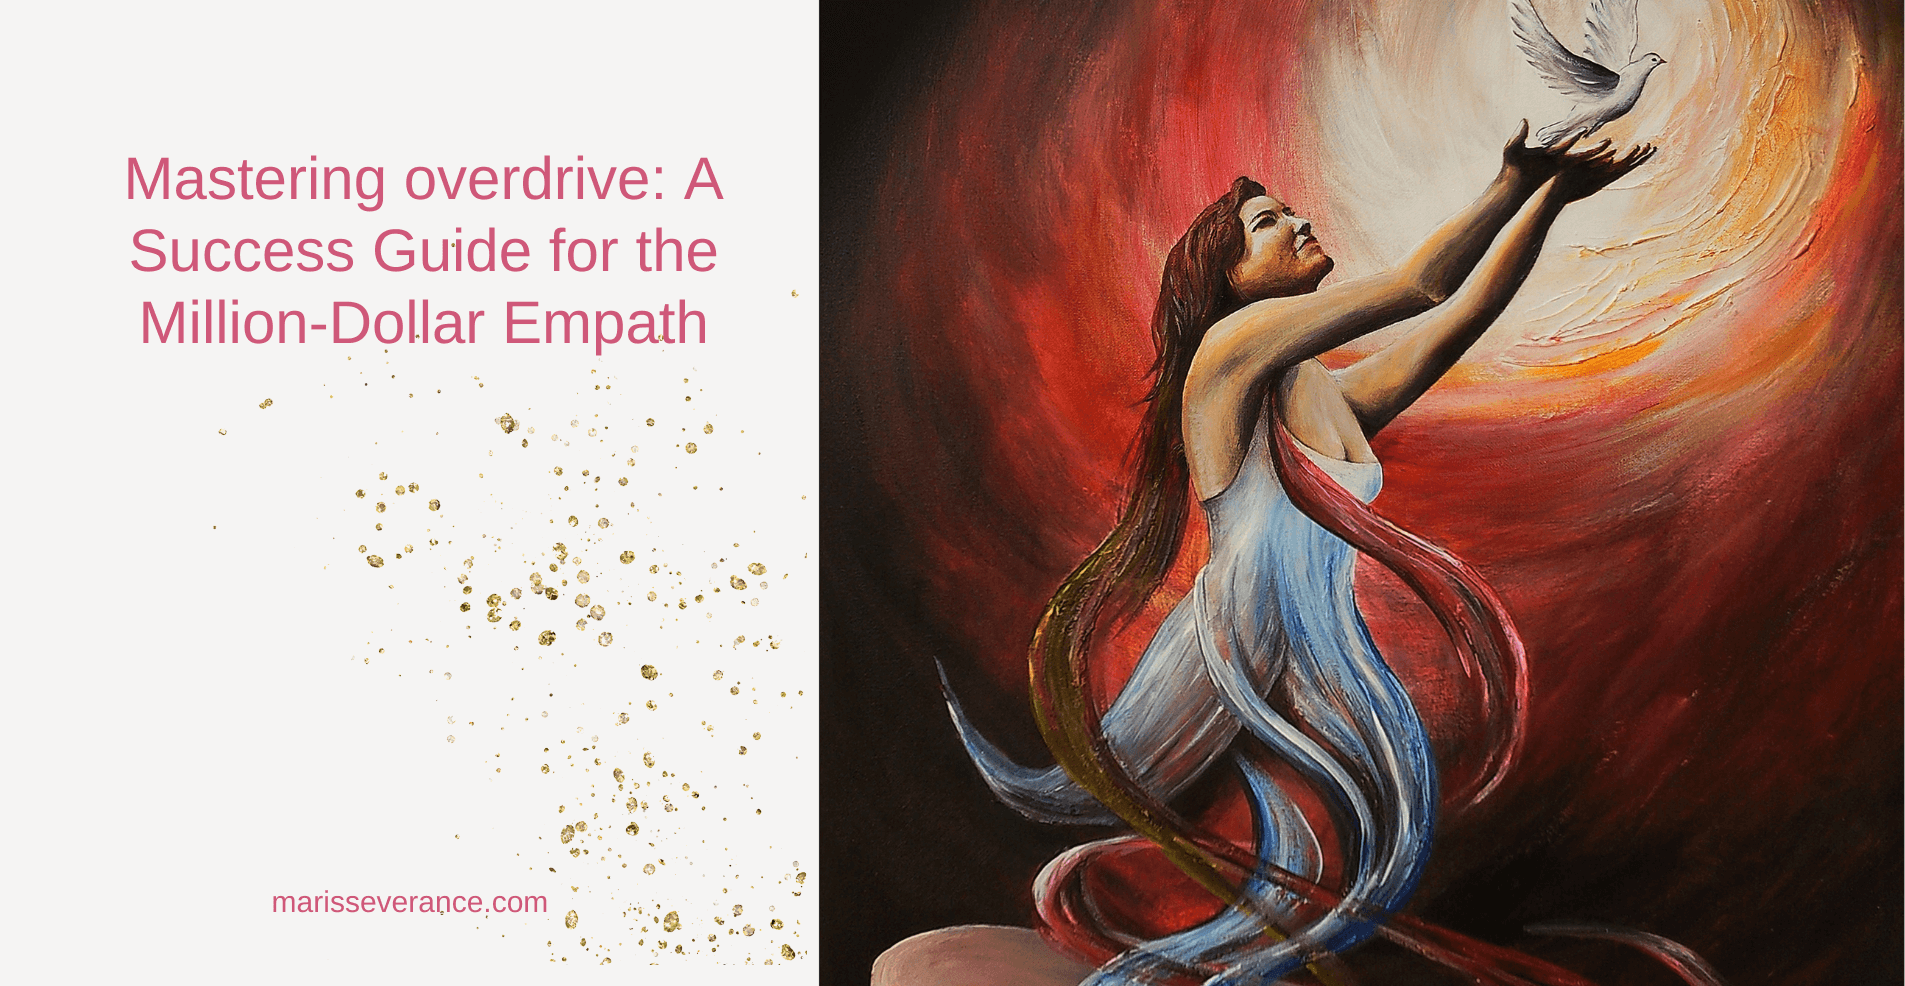 Mastering overdrive: A Success Guide for the Million-Dollar Empath